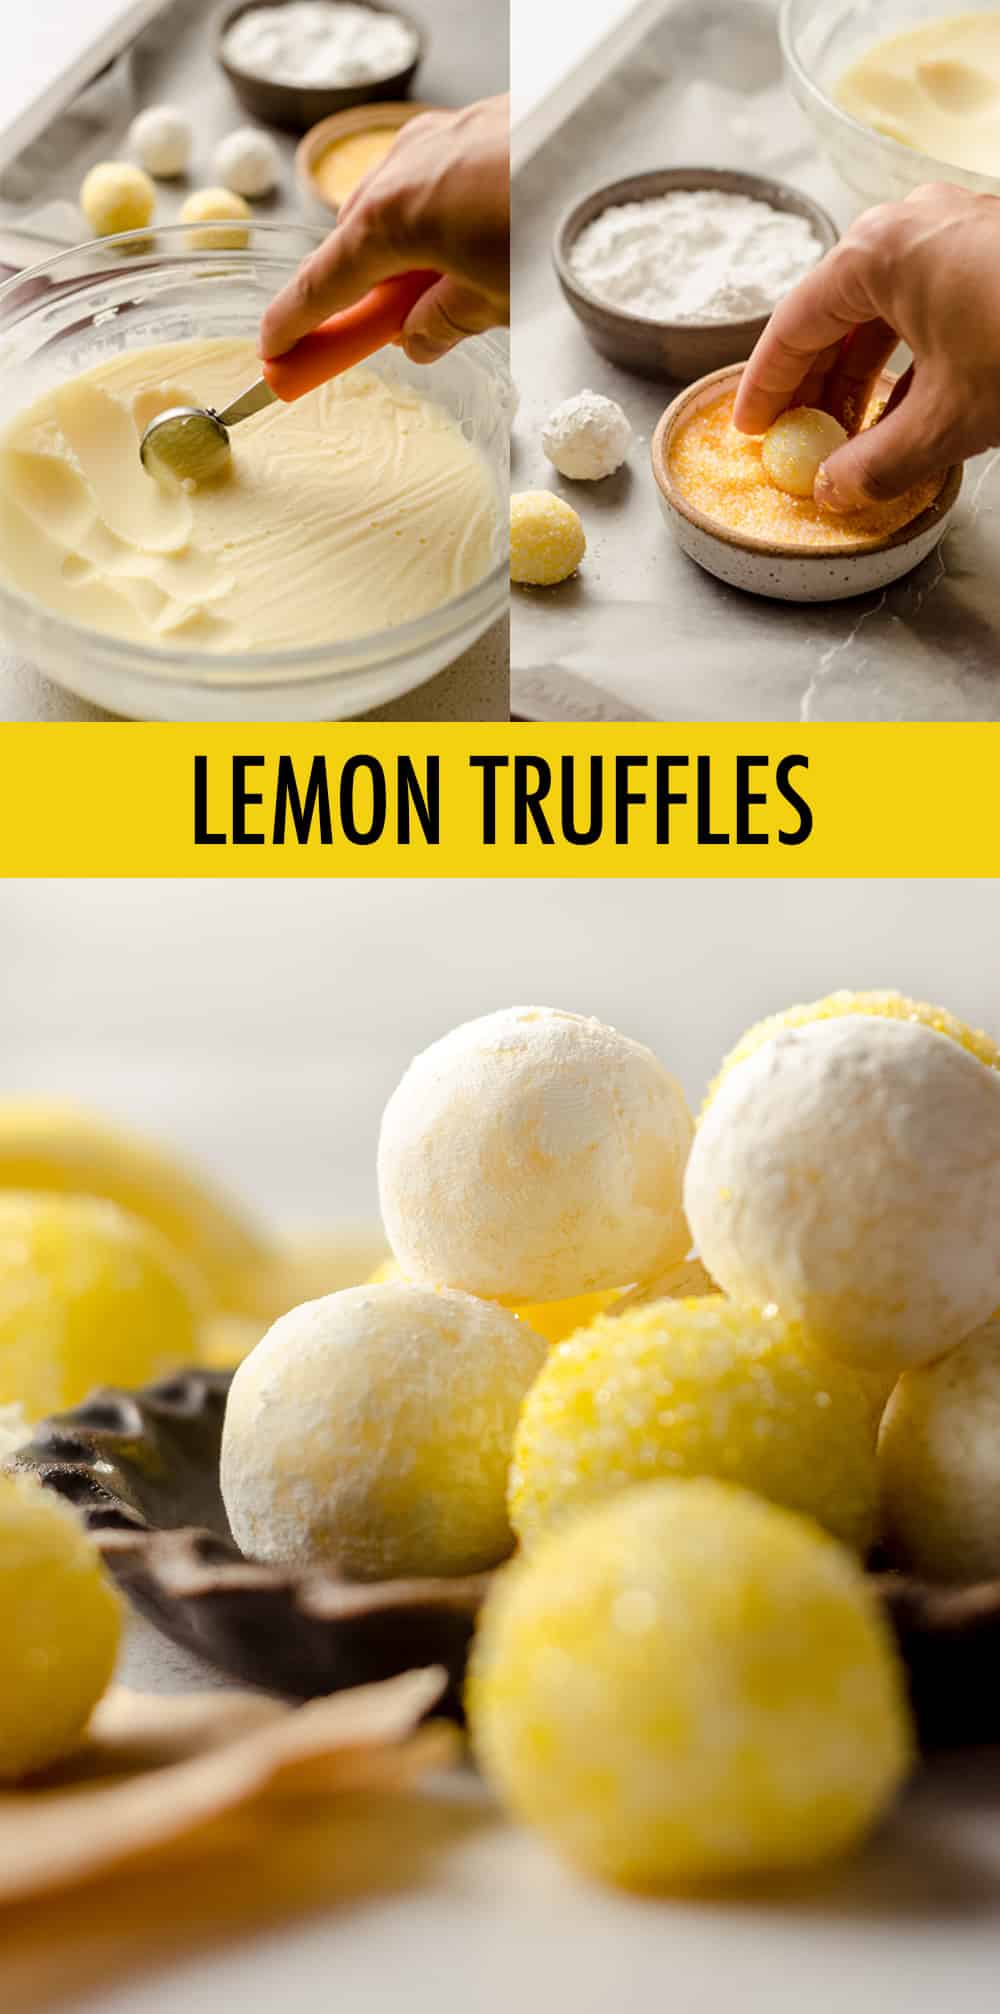 Smooth and creamy truffles full of lemon flavor and rolled in bright and sunny sprinkles. Easy to follow instructions will make you feel like a candy-making expert! via @frshaprilflours